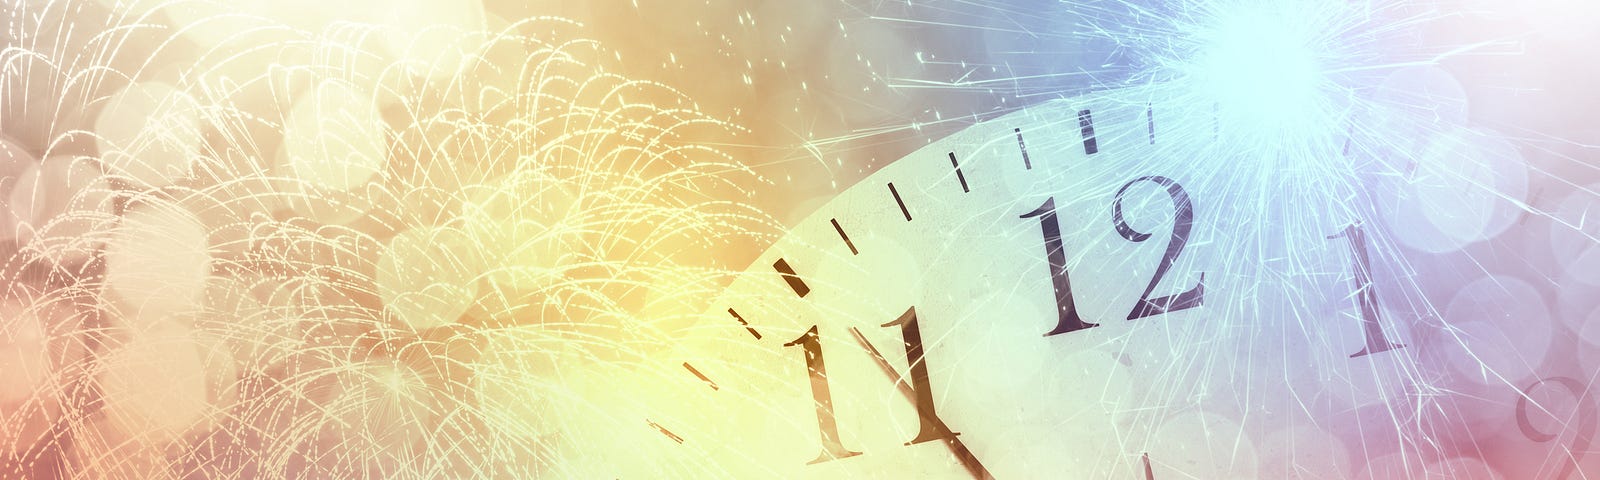 A pocket watch surrounded by festive fireworks for New Year’s